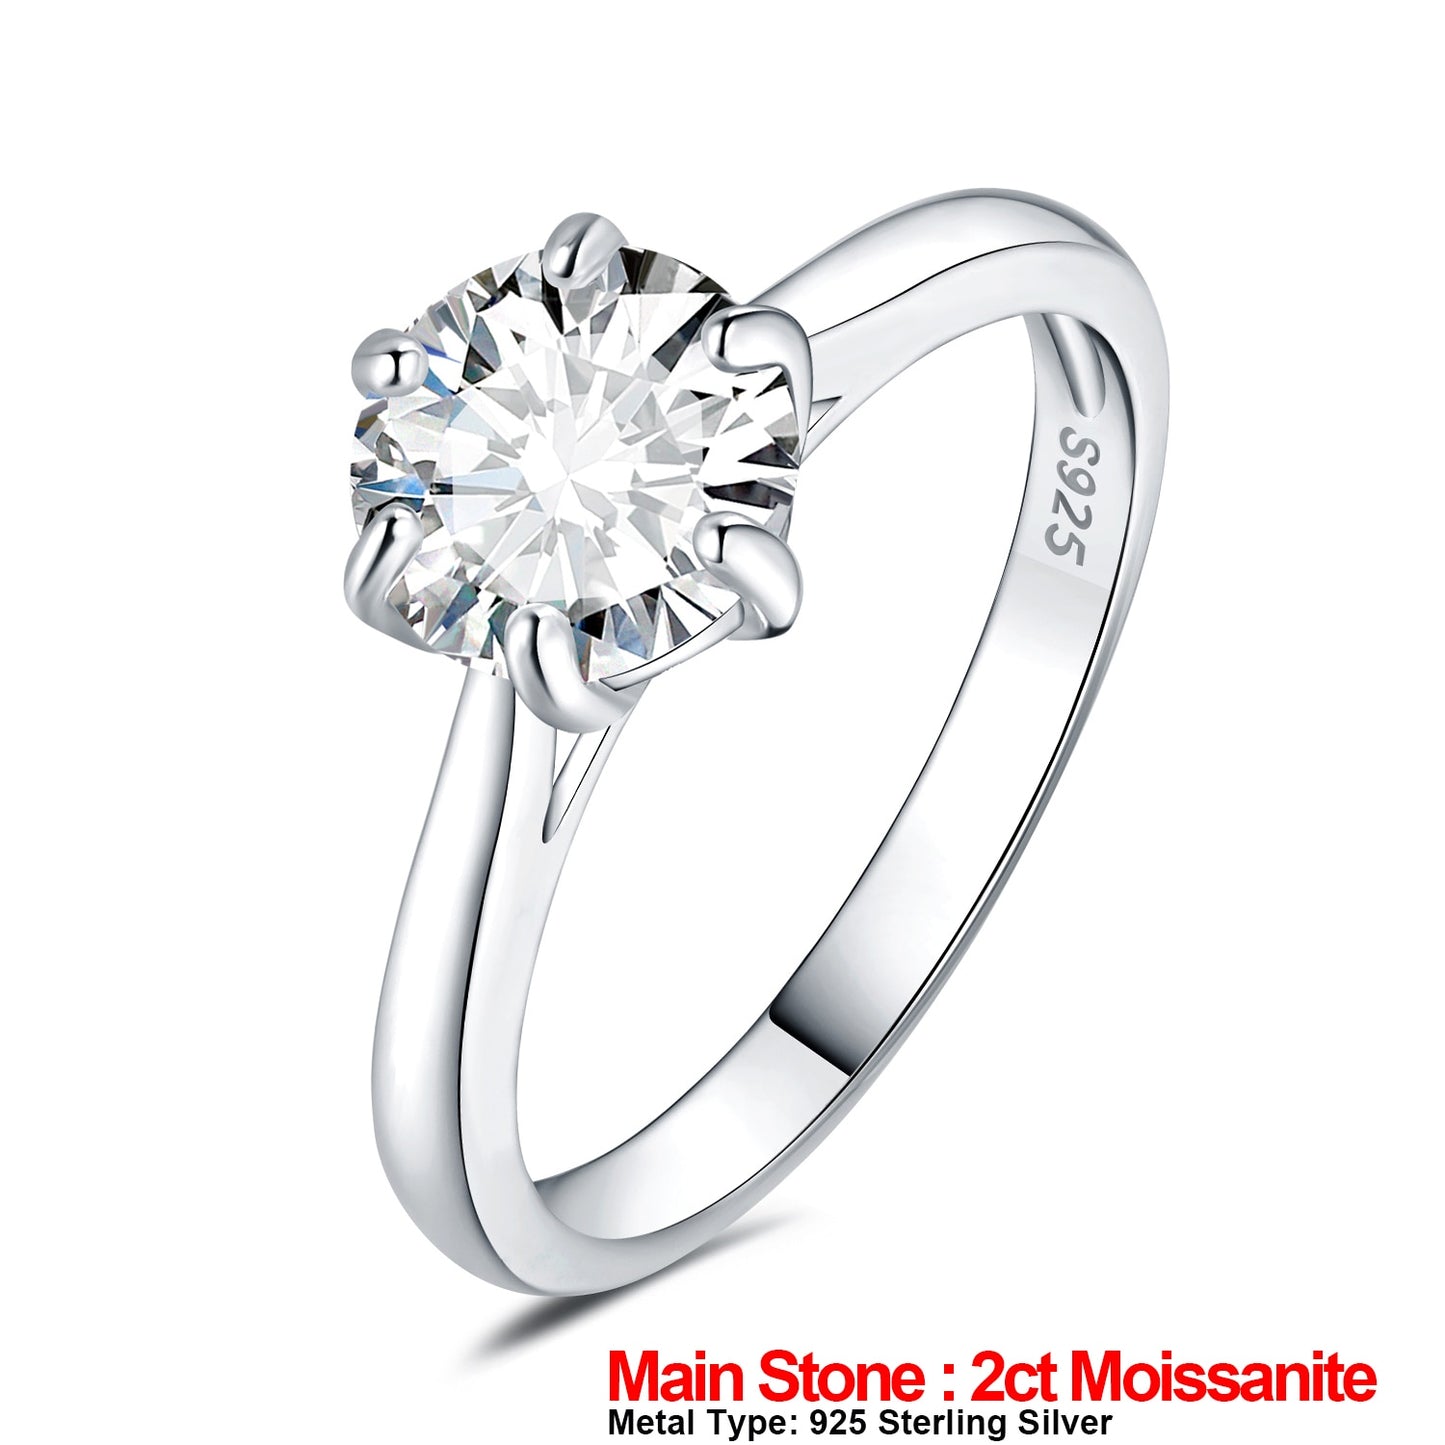 JewelryPalace Moissanite D Color 0.5ct 1ct 1.5ct 2ct Round Cut S925 Sterling Silver Solitaire Wedding Engagement Ring for Women 9 China 925 Sterling Silver 3|GRA Certificate